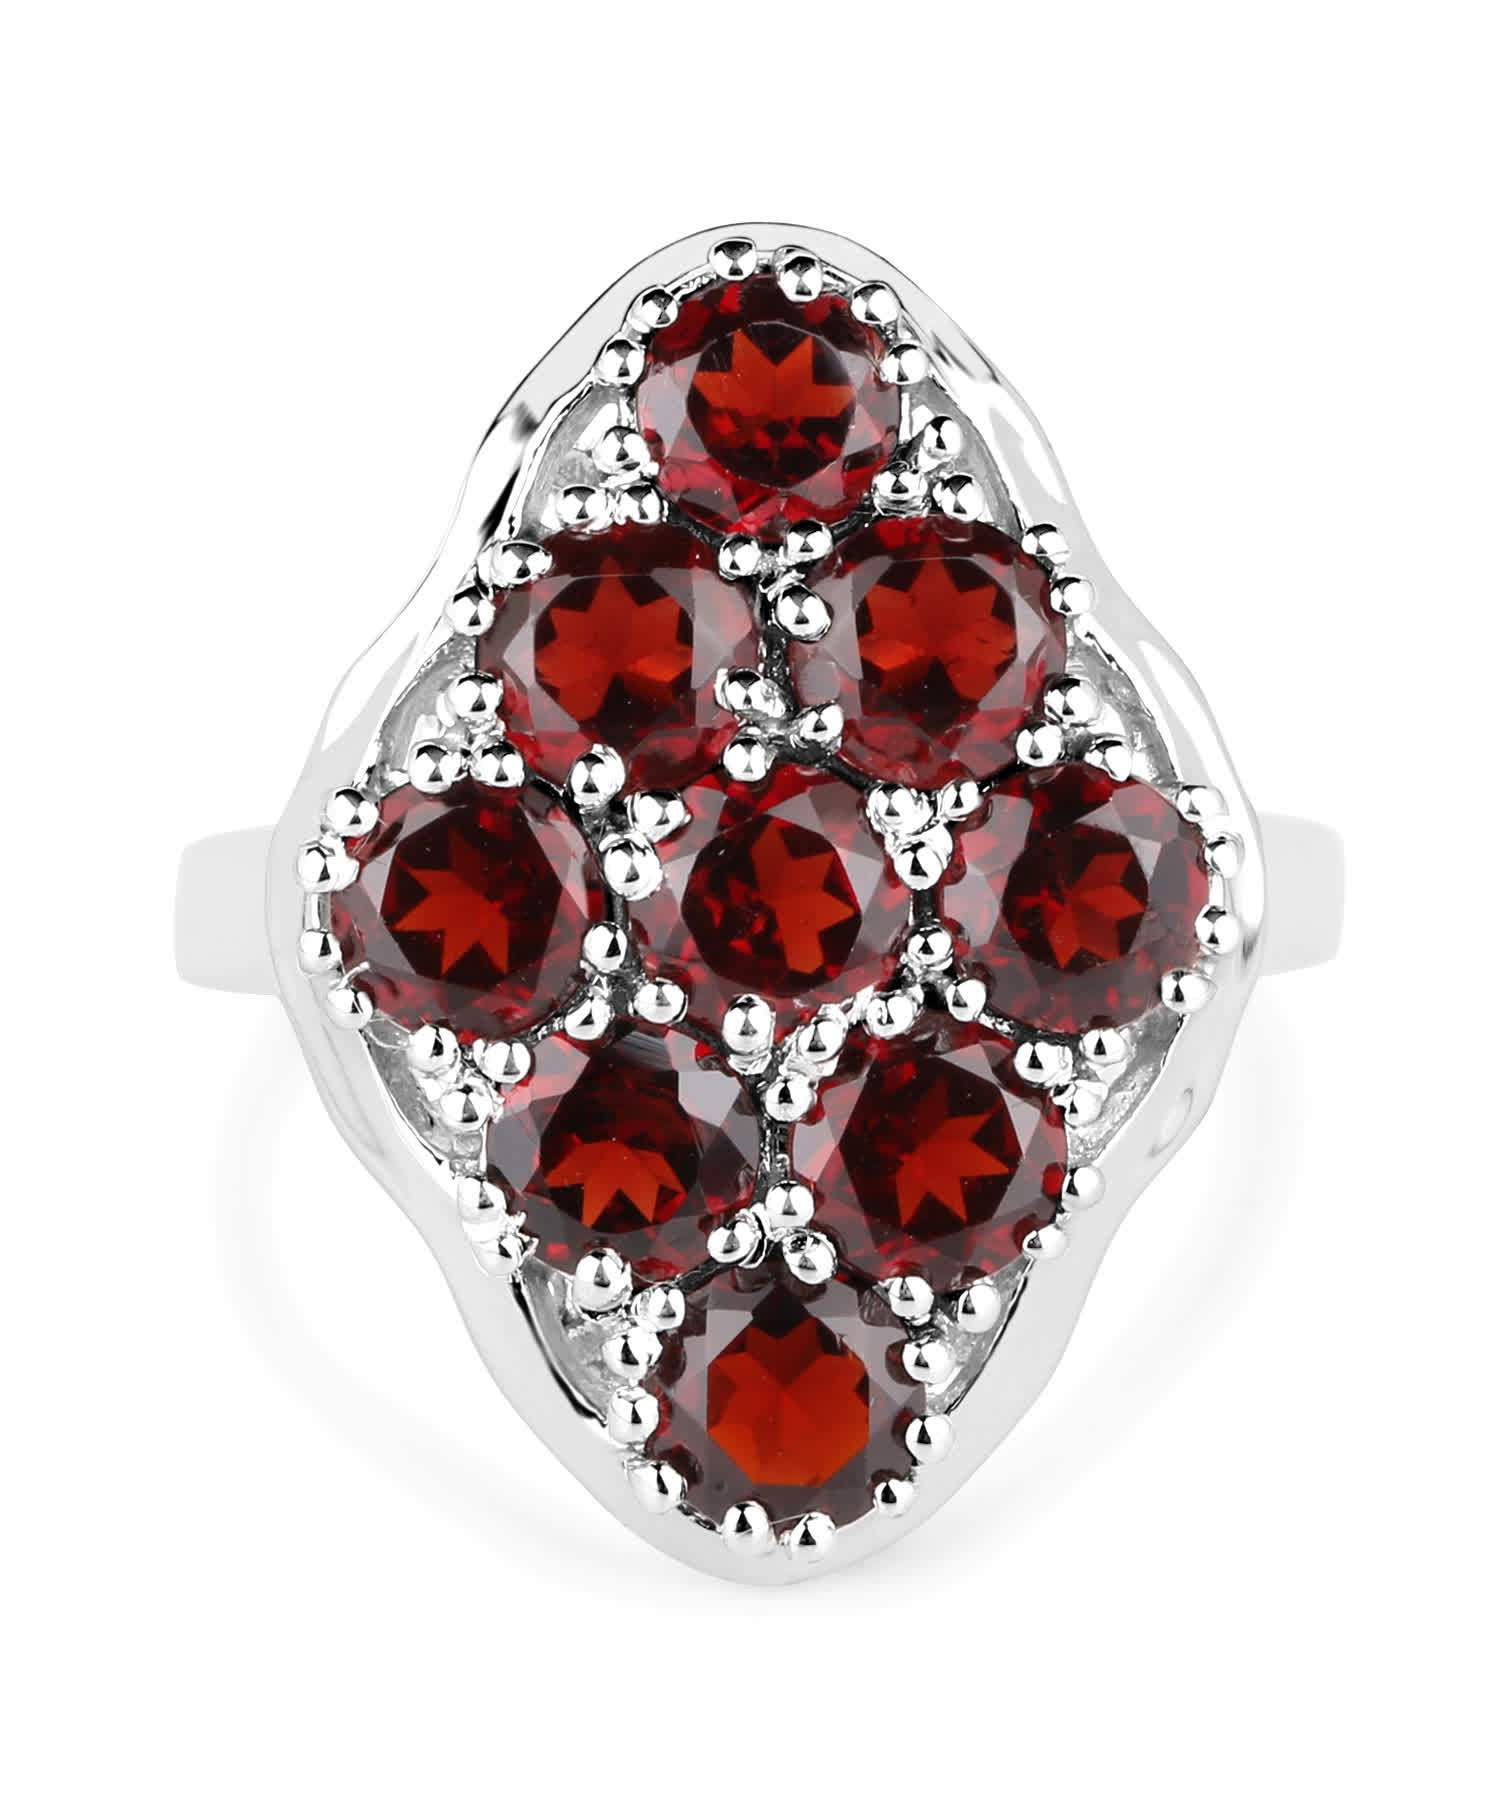 5.22ctw Natural Pomegranate Garnet Rhodium Plated 925 Sterling Silver Right Hand Ring View 3